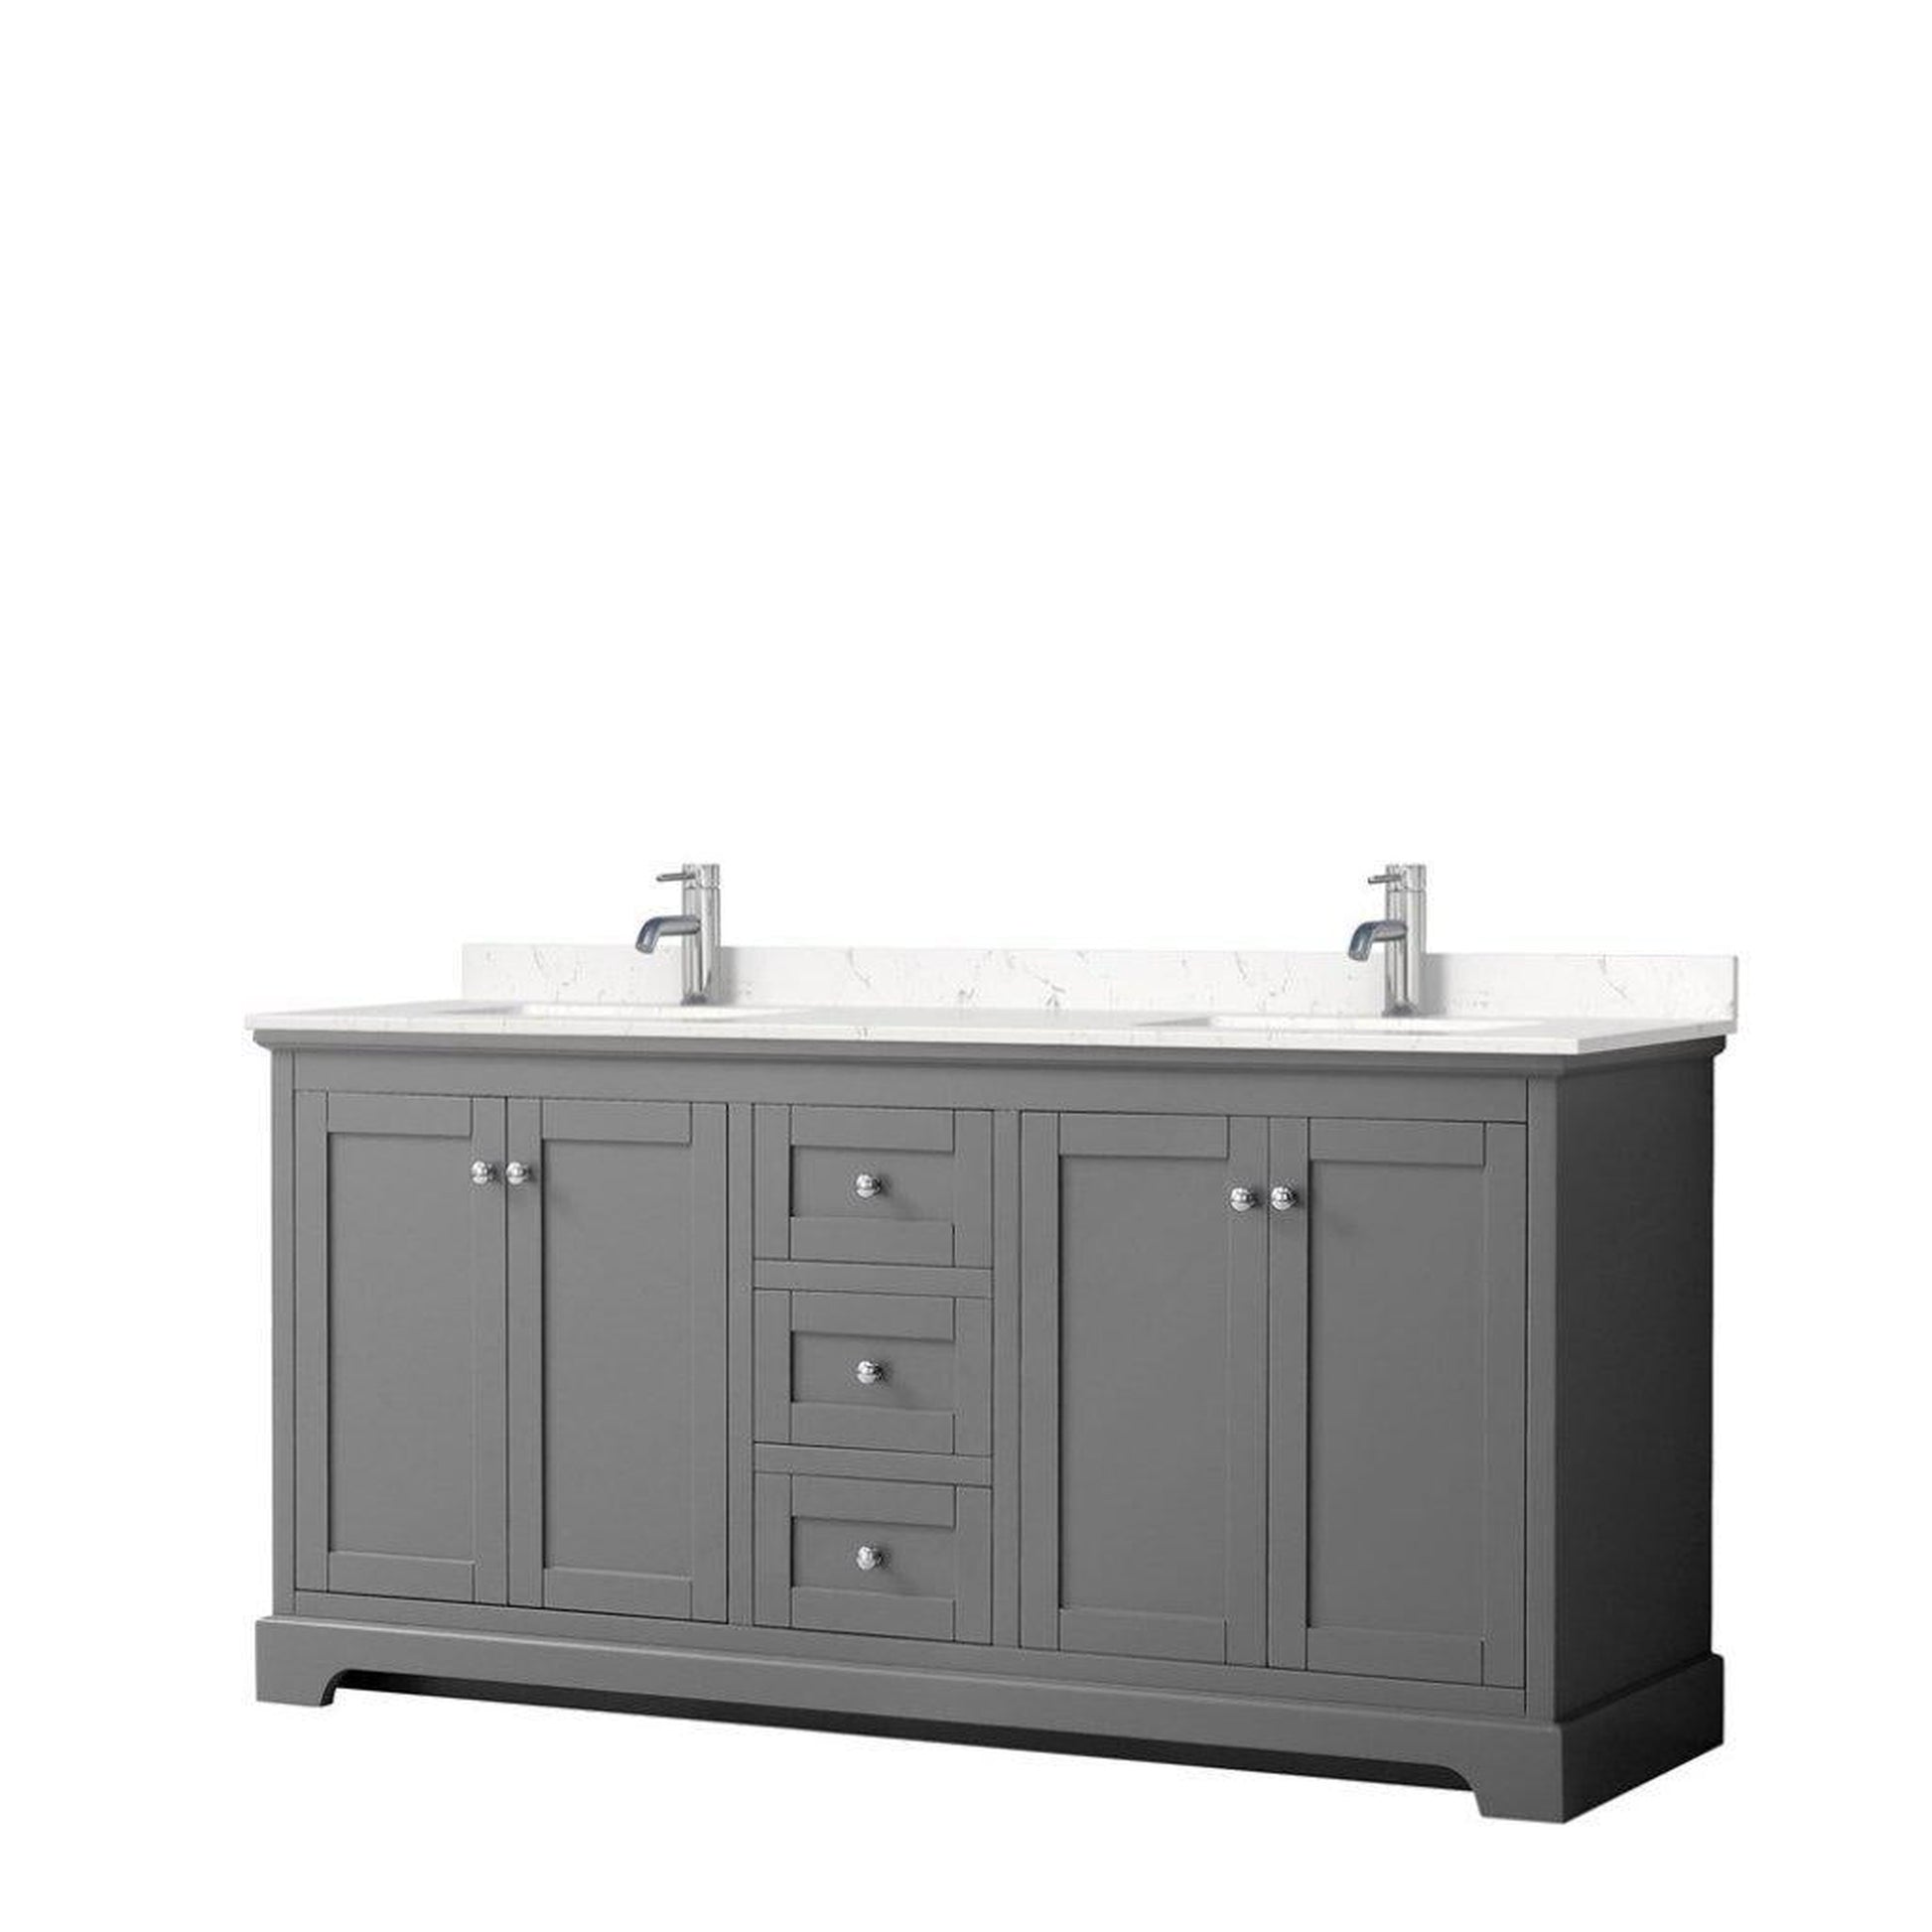 Wyndham Collection Avery 72" Dark Gray Double Bathroom Vanity With Light-Vein Cultured Marble Countertop With 1-Hole Faucet And Square Sink